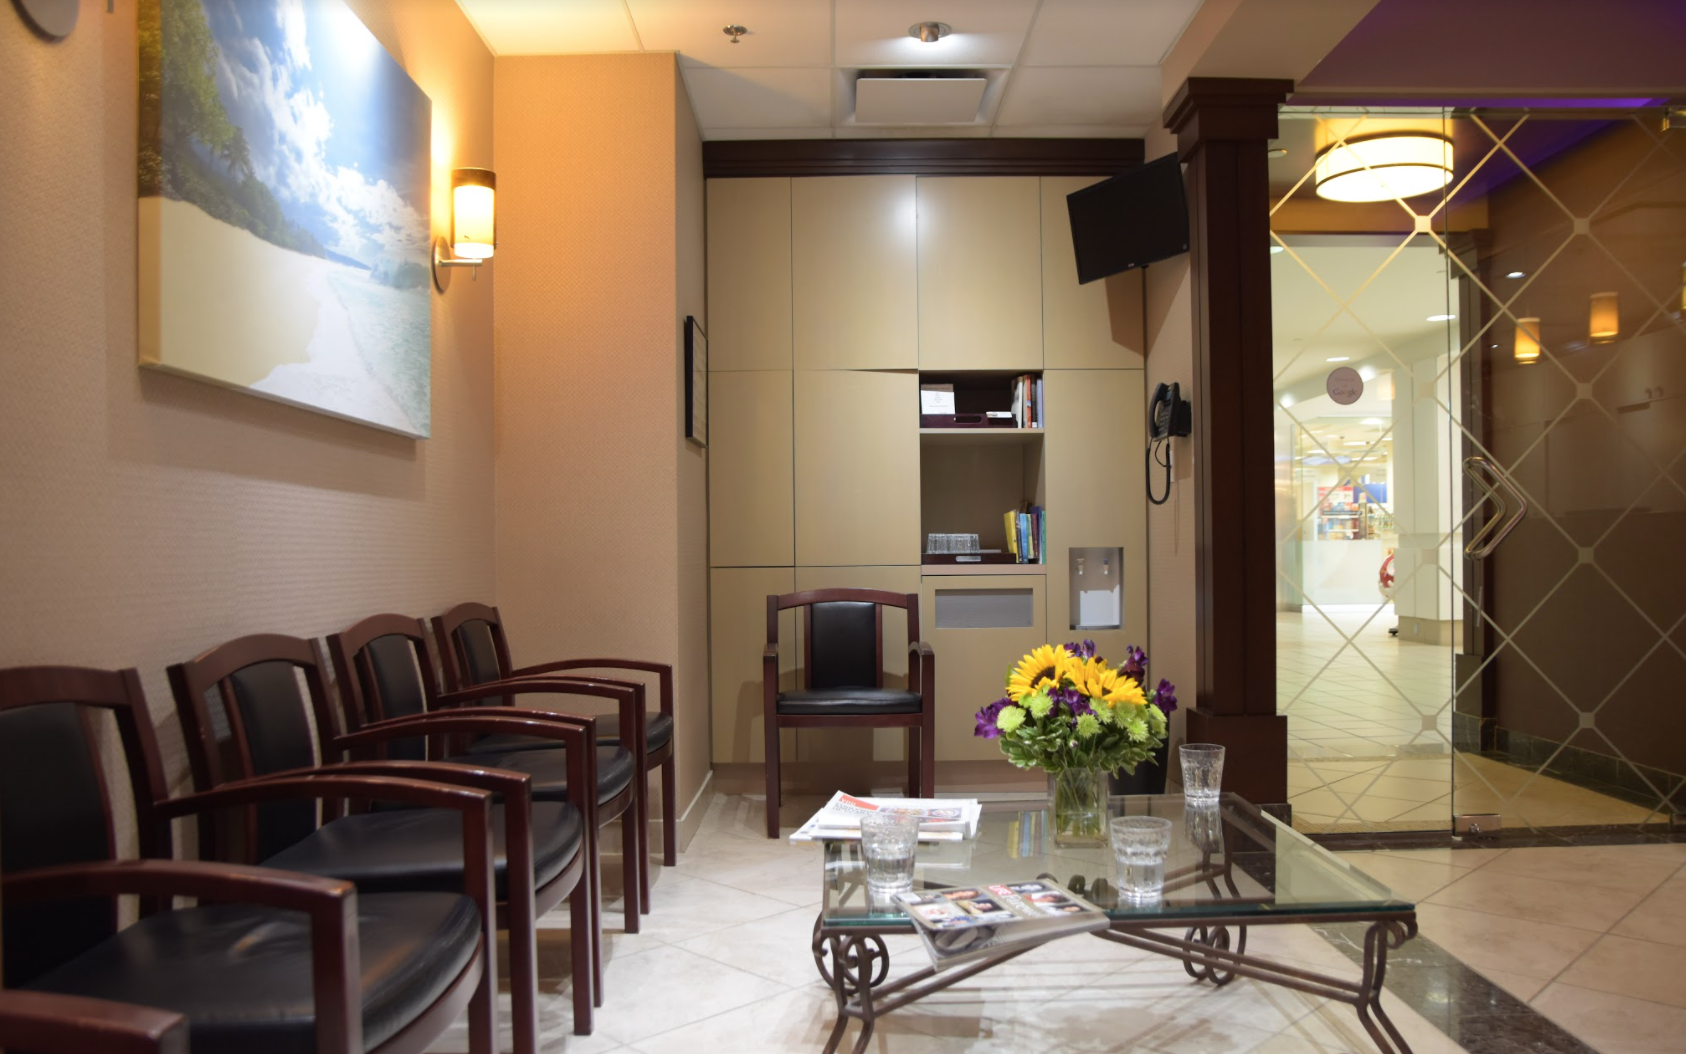 VCCID dental clinic in burnaby, bc 